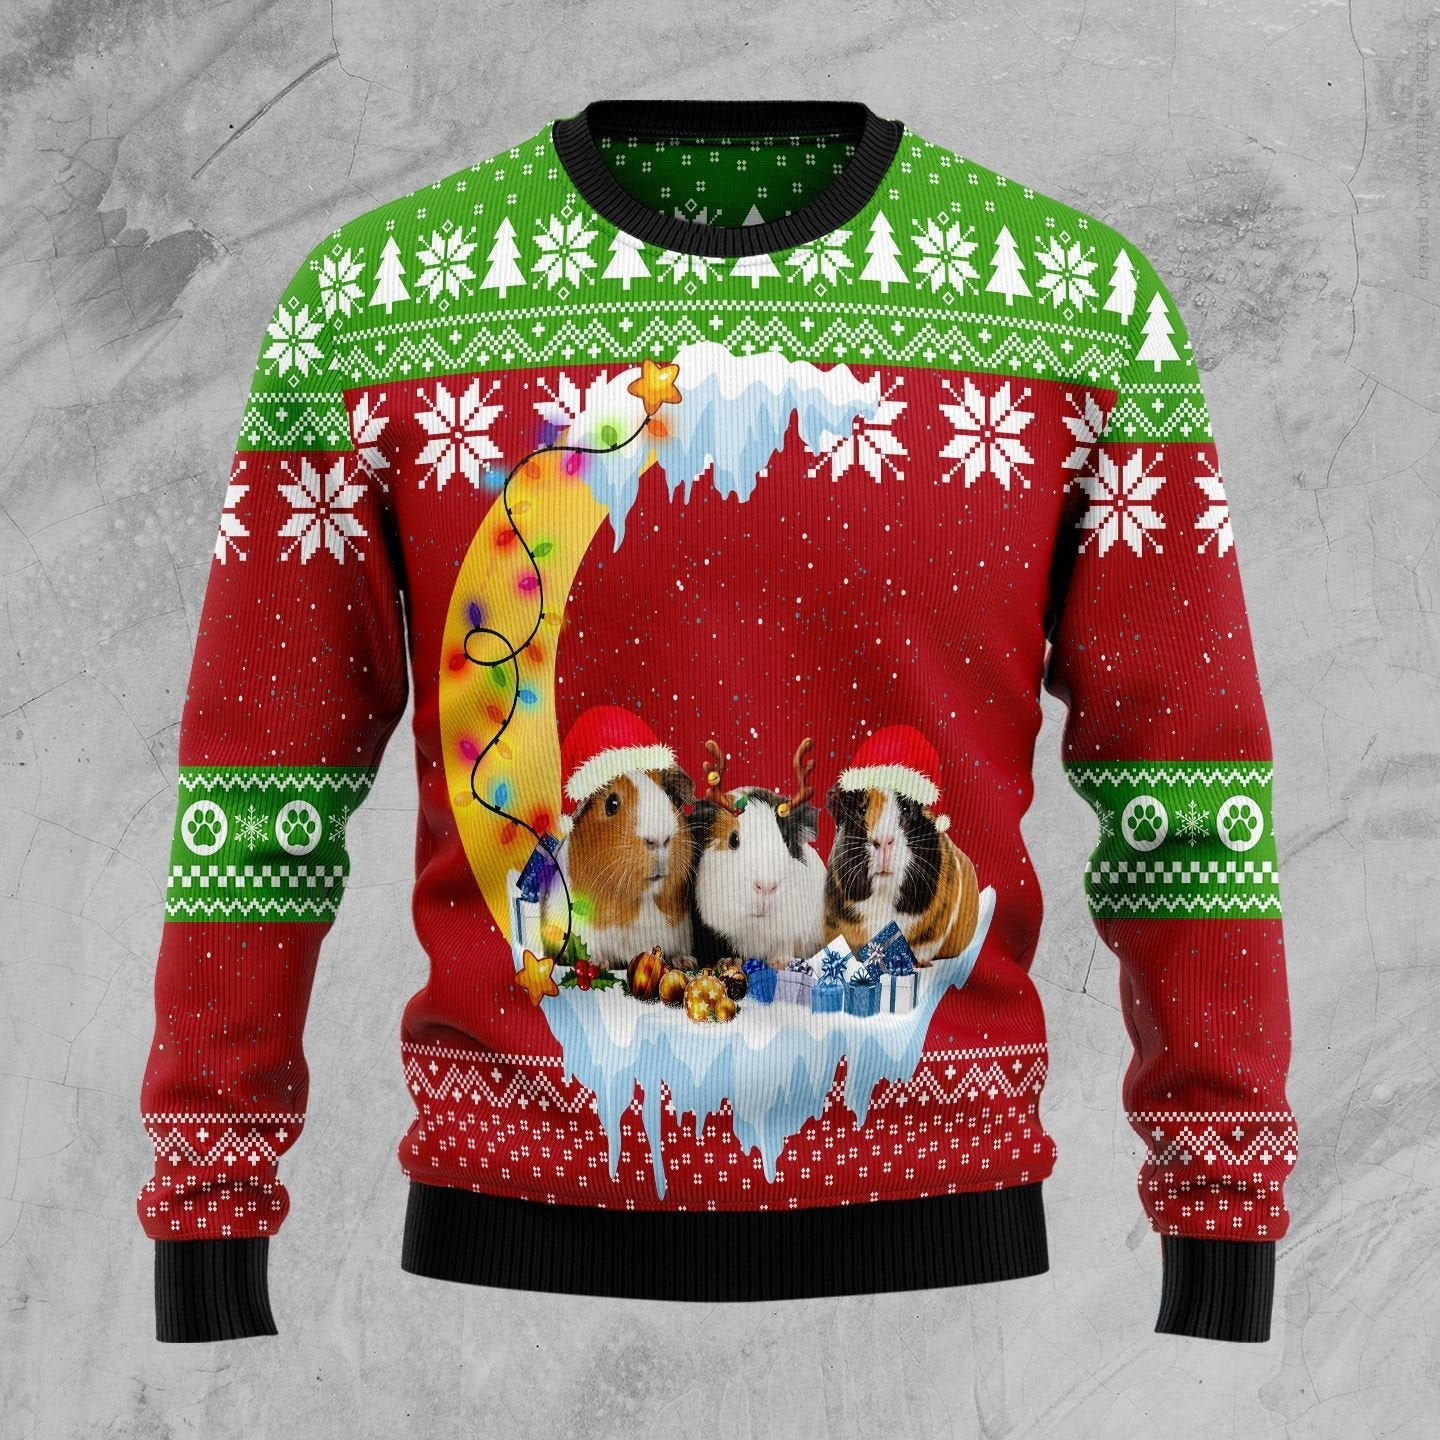 Guinea Pig Love Moon Xmas Ugly Christmas Sweater Ugly Sweater For Men Women, Holiday Sweater